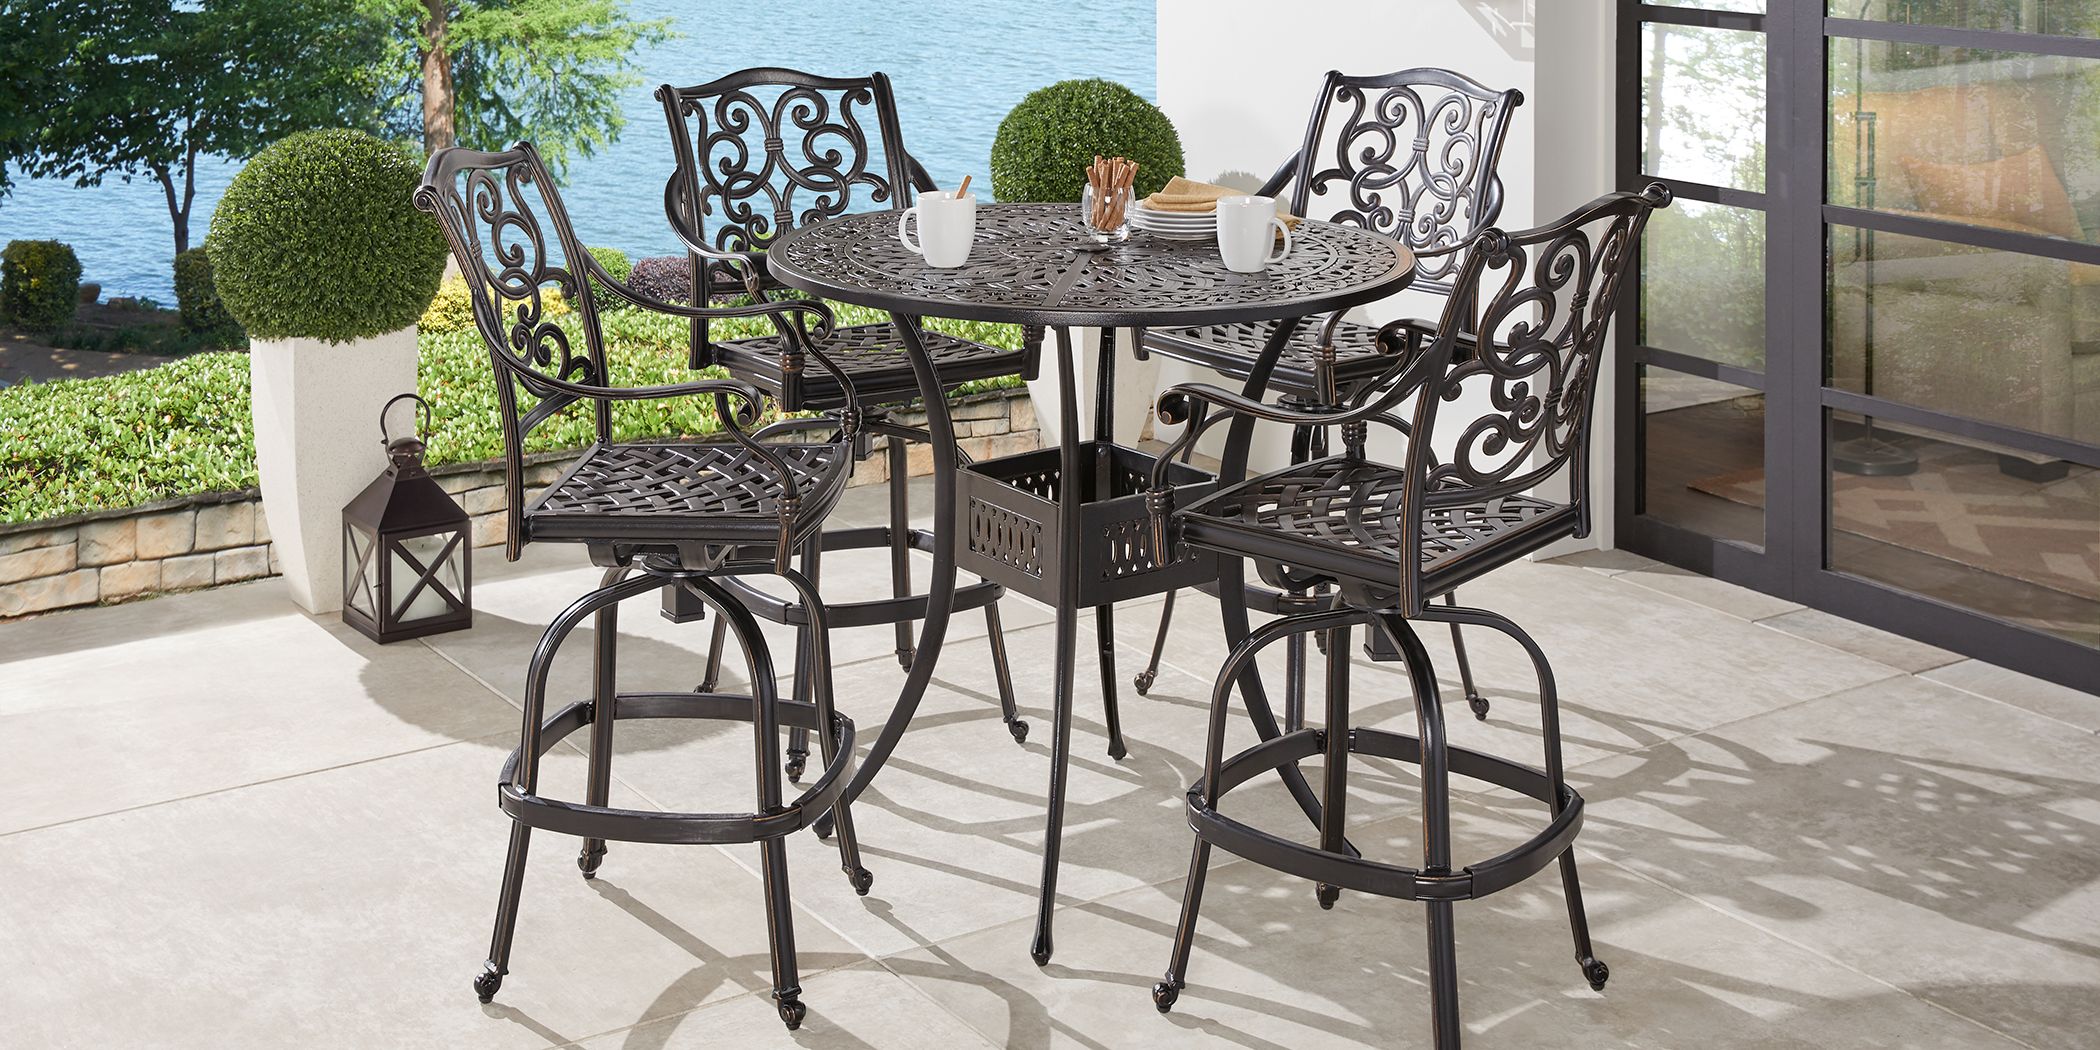 5 Piece Outdoor Bar Sets, Outdoor Bar Height Dining Table And Chairs